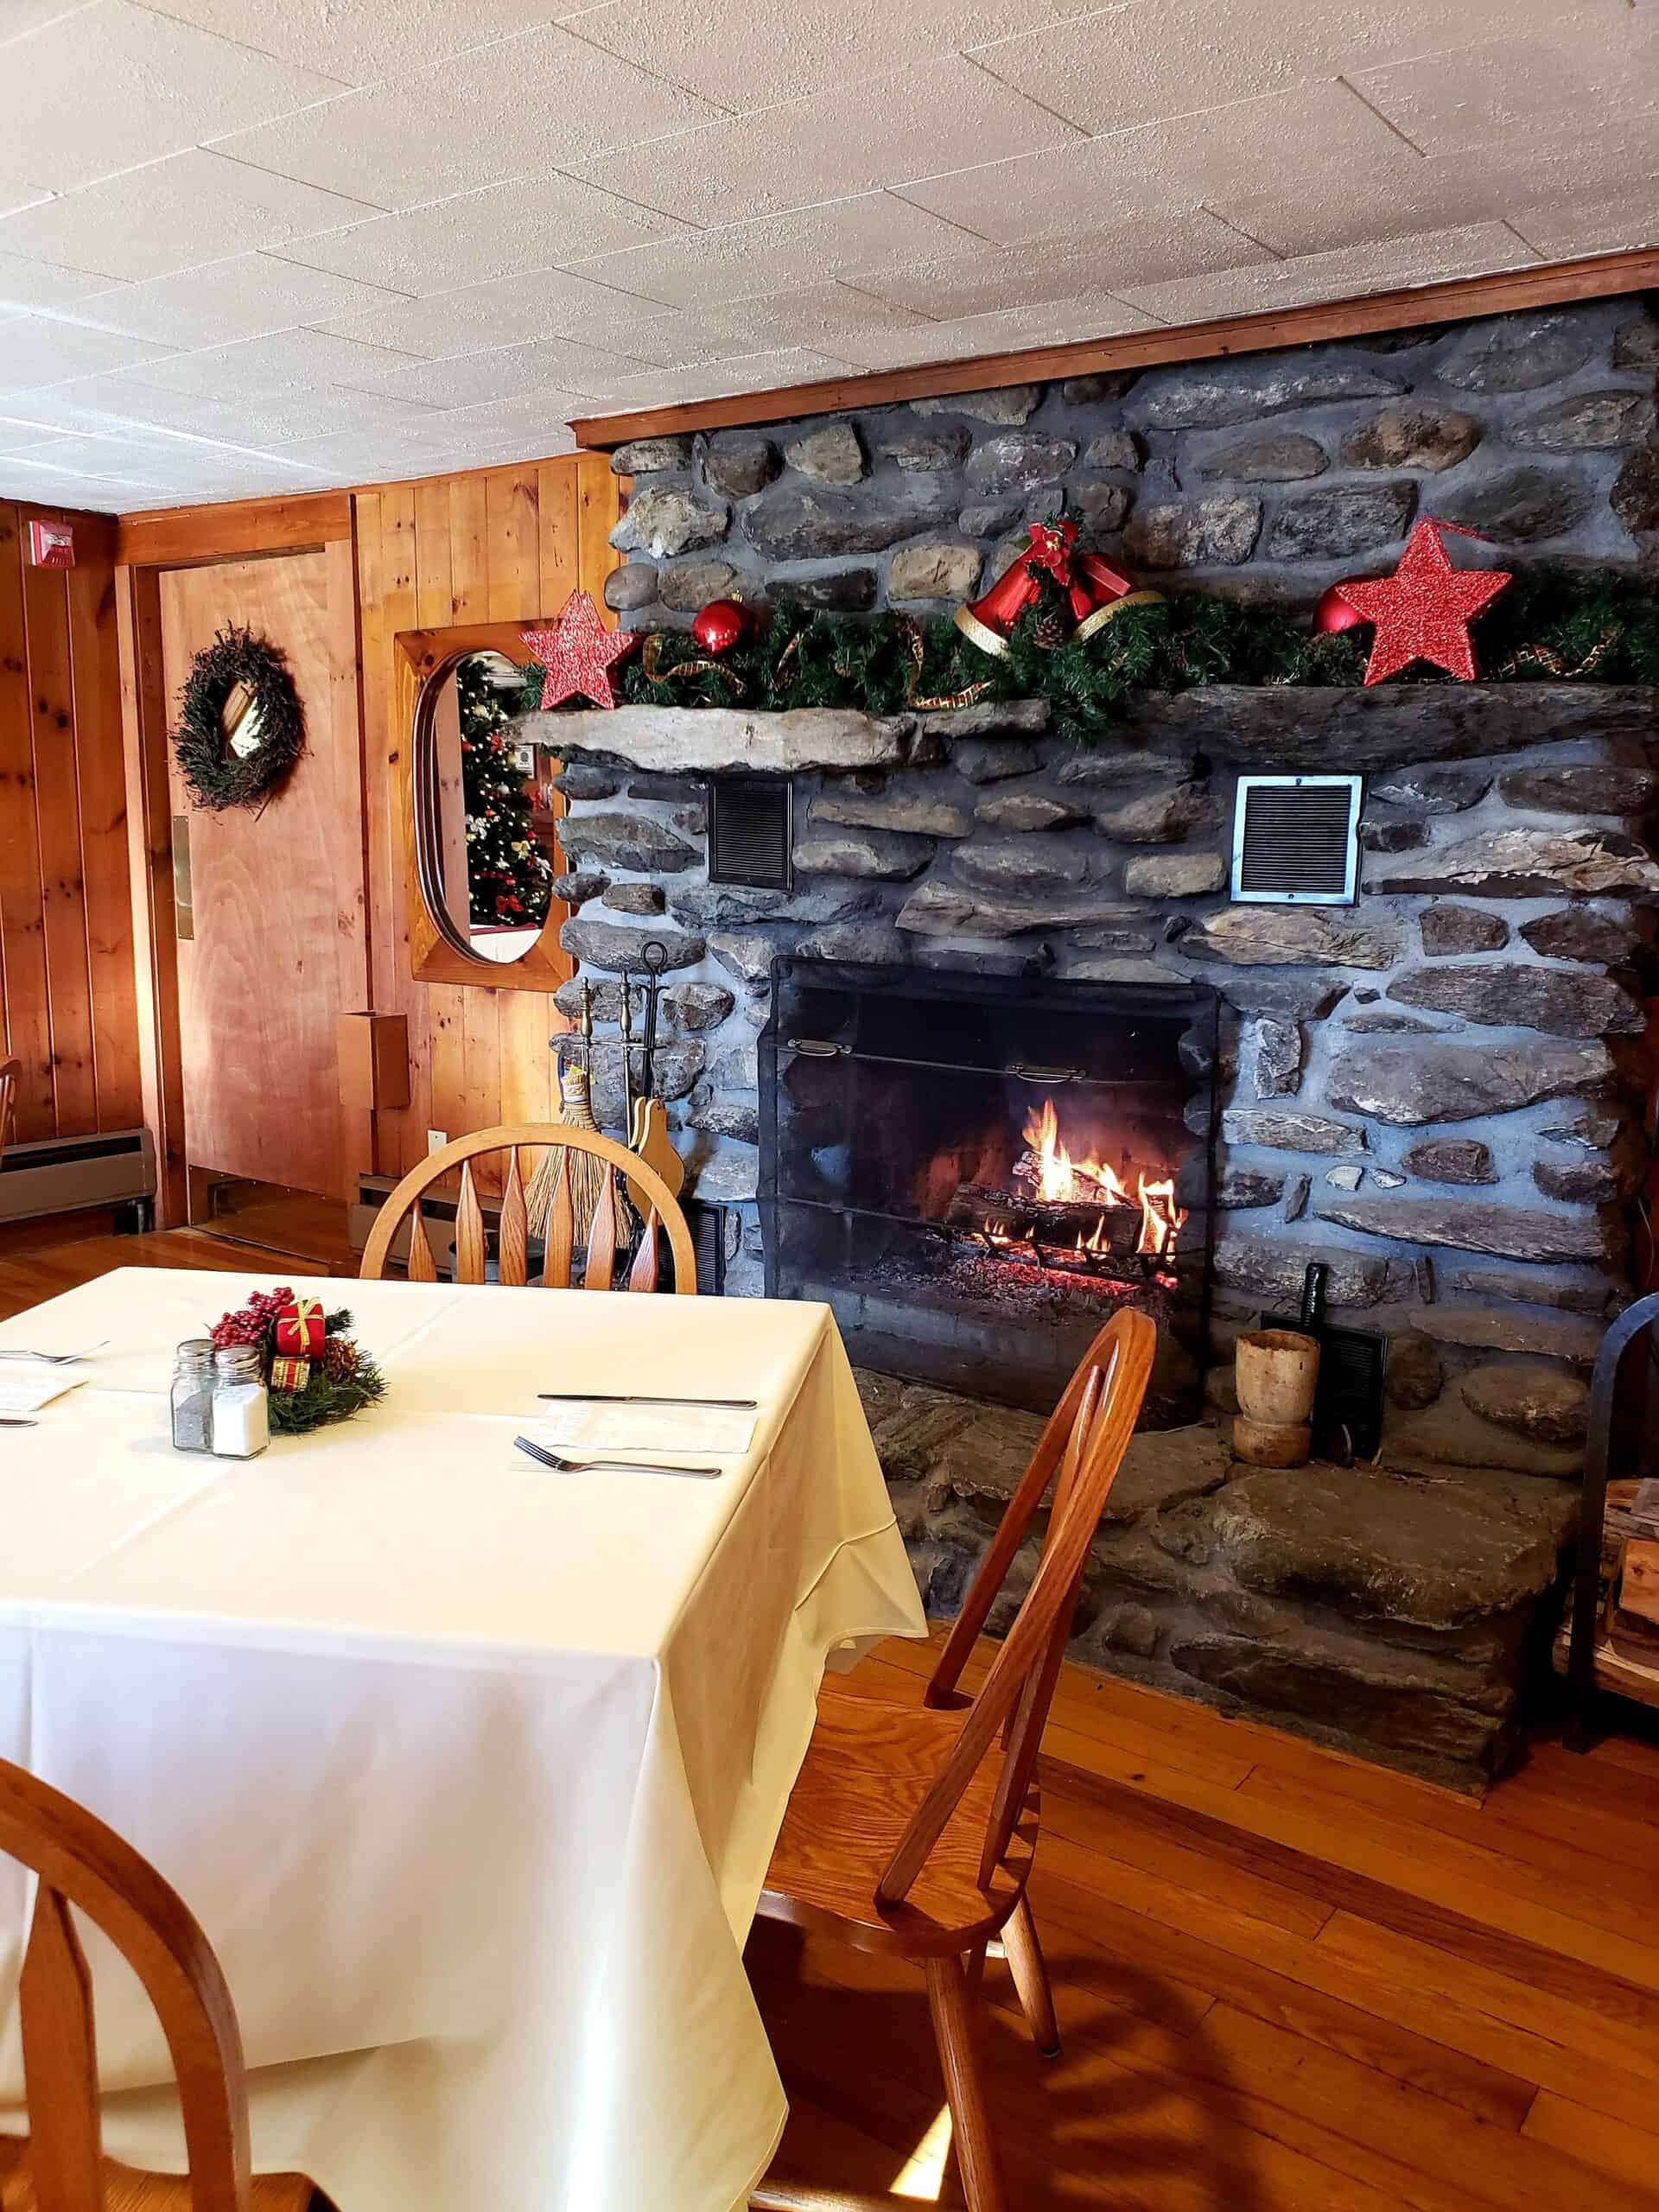 The Vermont Inn - Dining Room with Fireplace